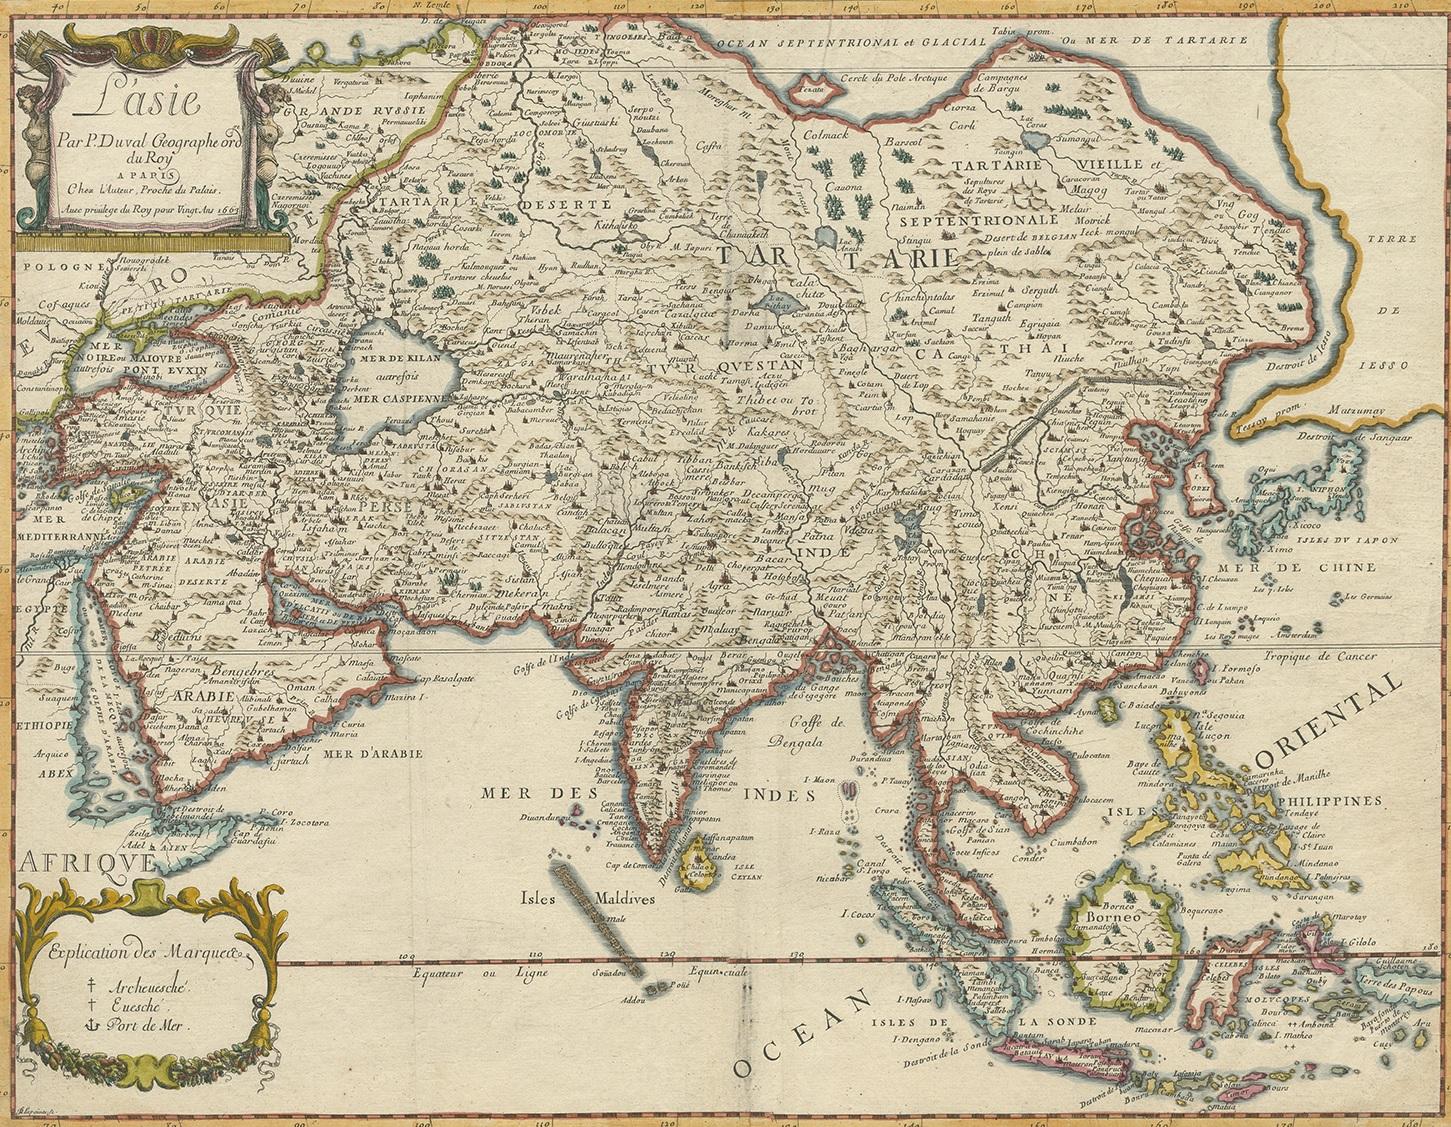 Antique map titled 'L'Asie'. Antique map of the Asian continent by Pierre Duval, dated 1663. Most place names represent geographical entities that currently exist or once existed. The rendition of the lower islands of Japan and the peninsula of